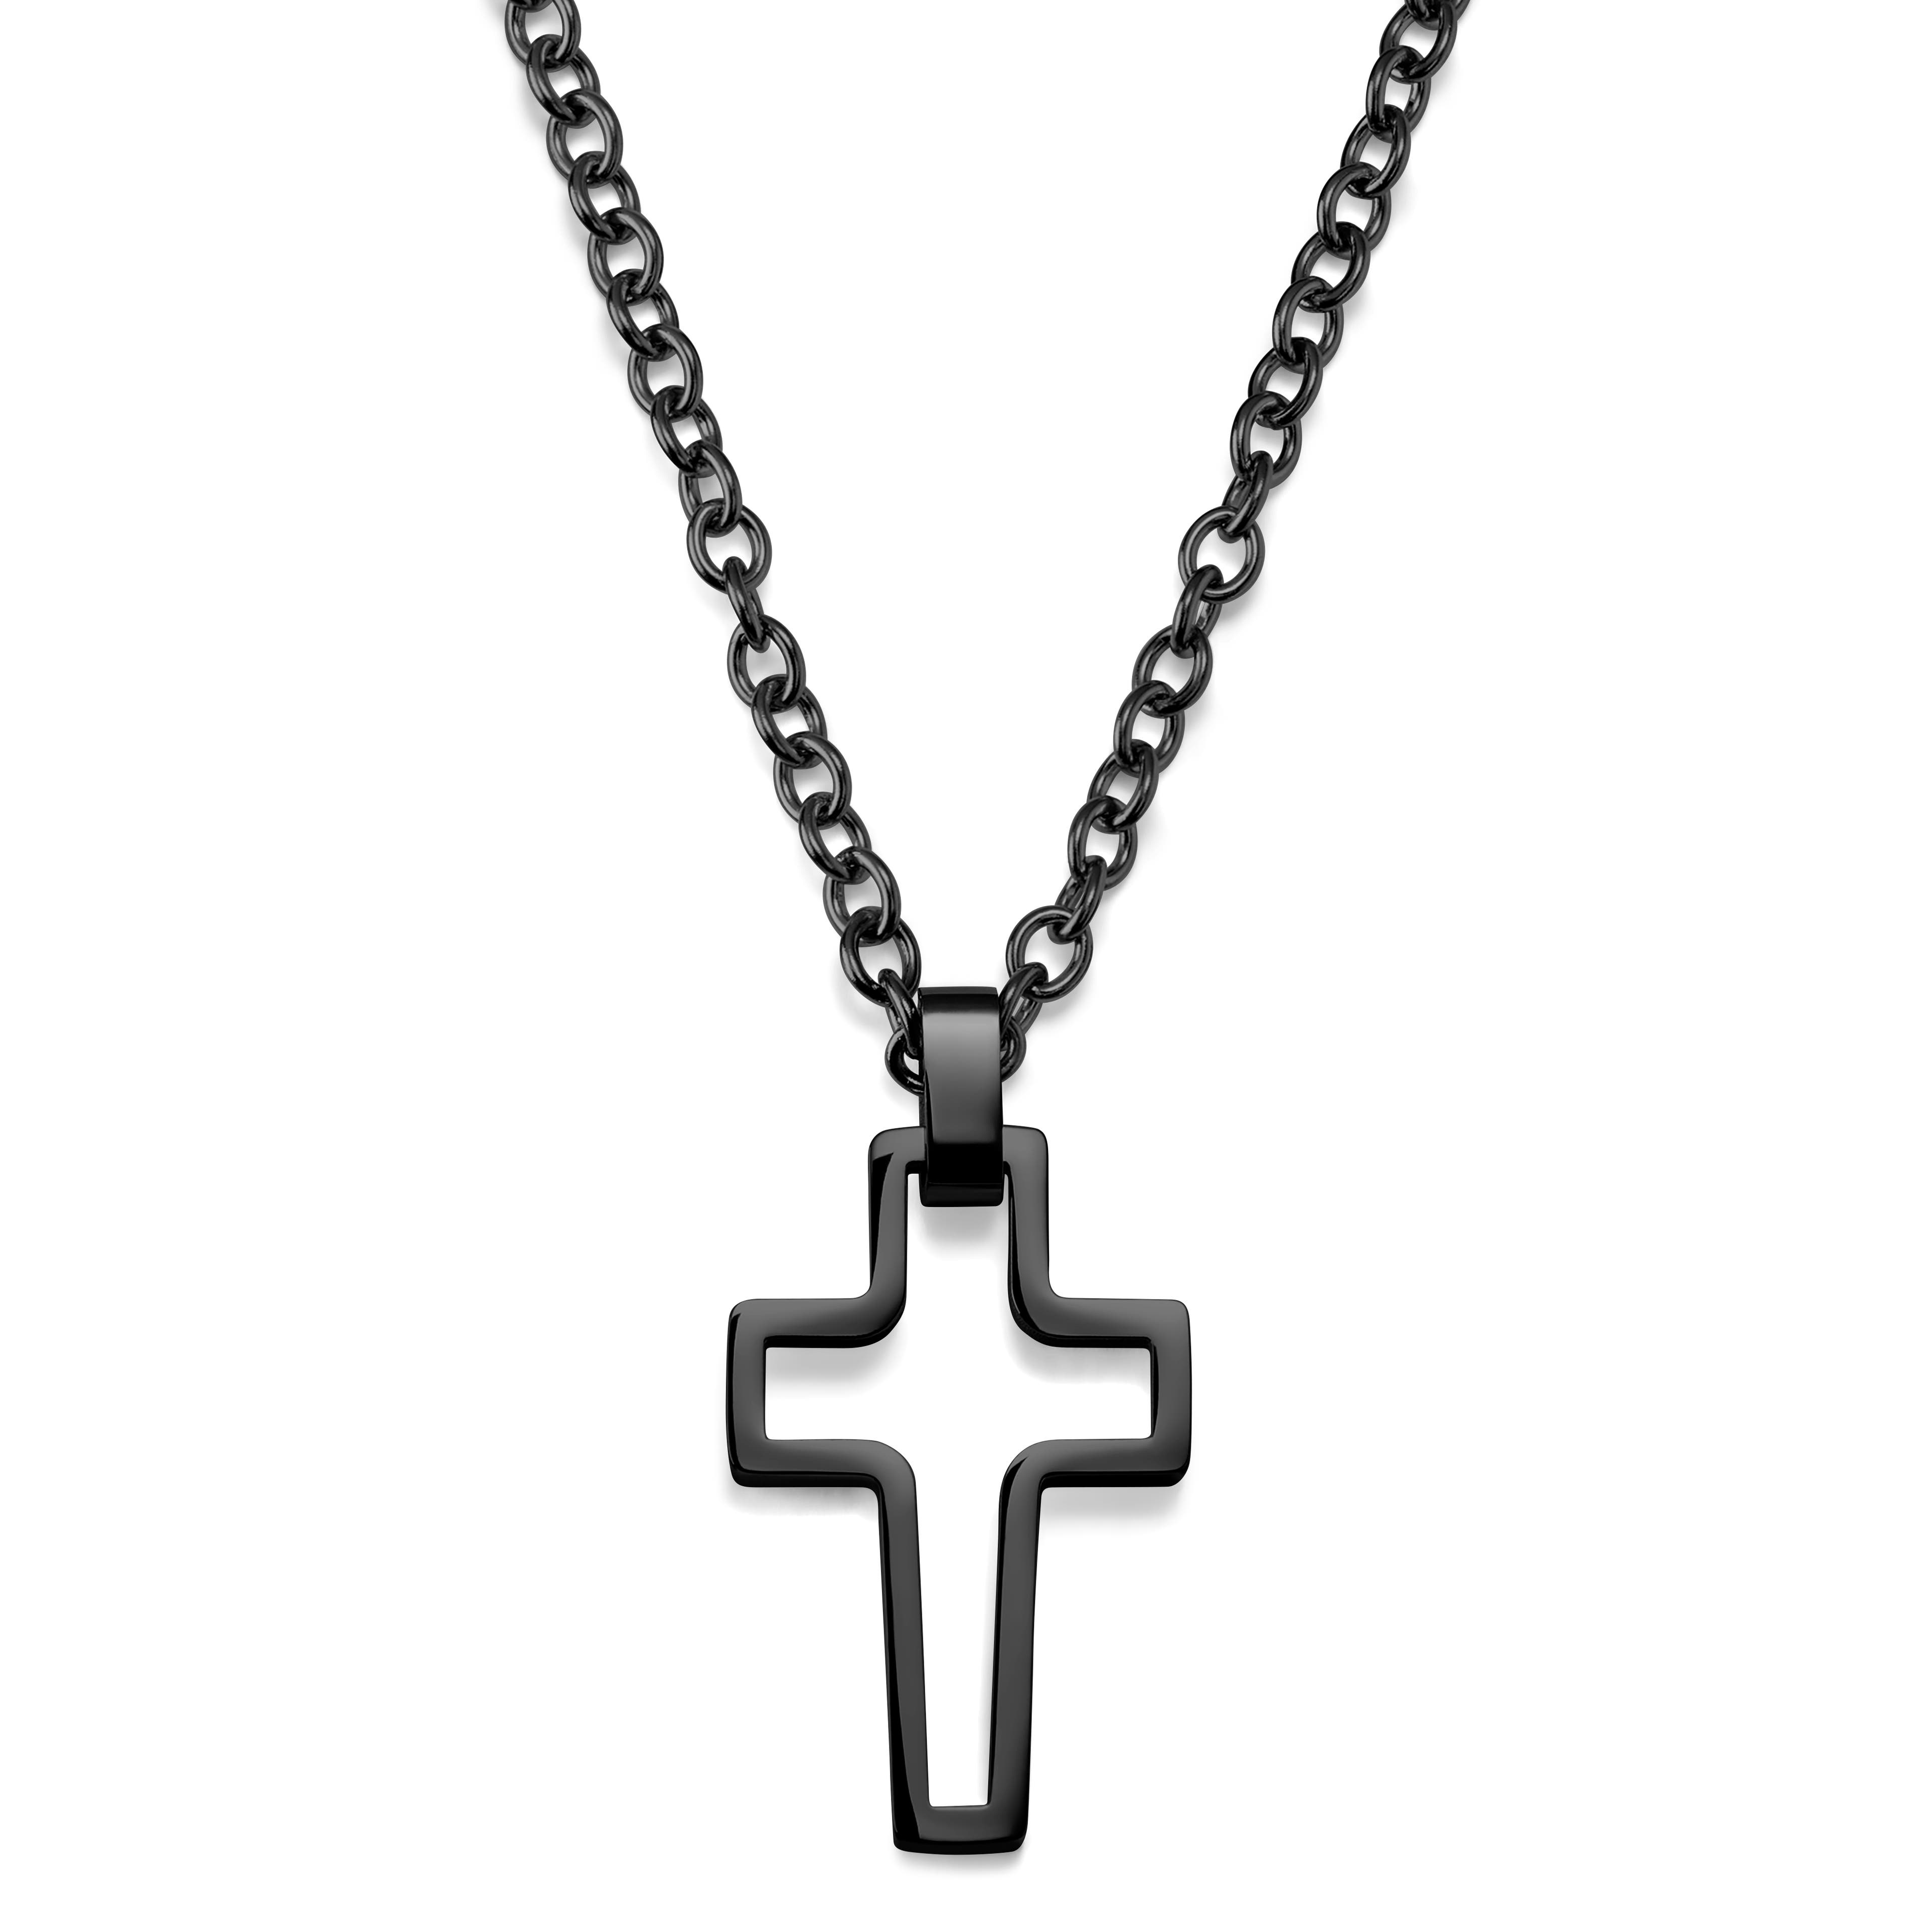 Black Stainless Steel With Hollow Cross Cable Chain Necklace